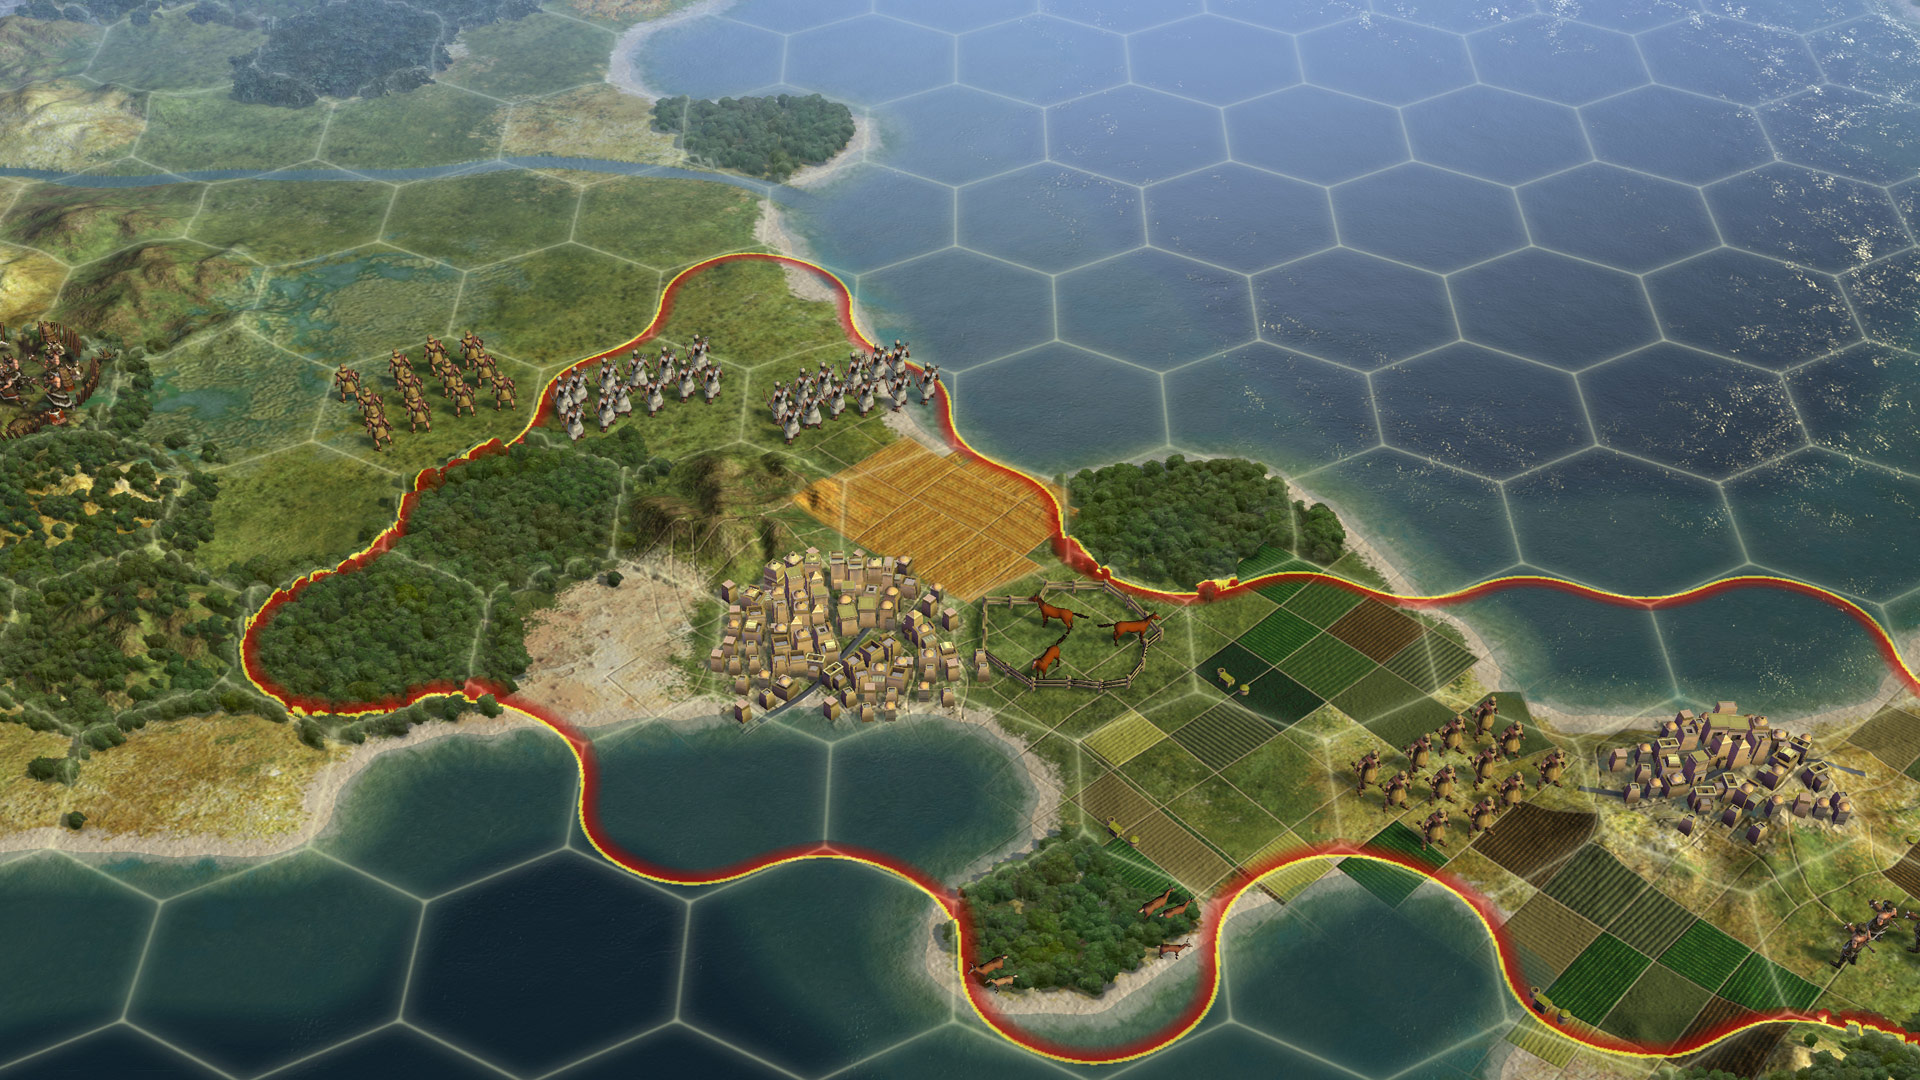 Civilization 5 - A hex grid map in Civ 5 with fields and cities